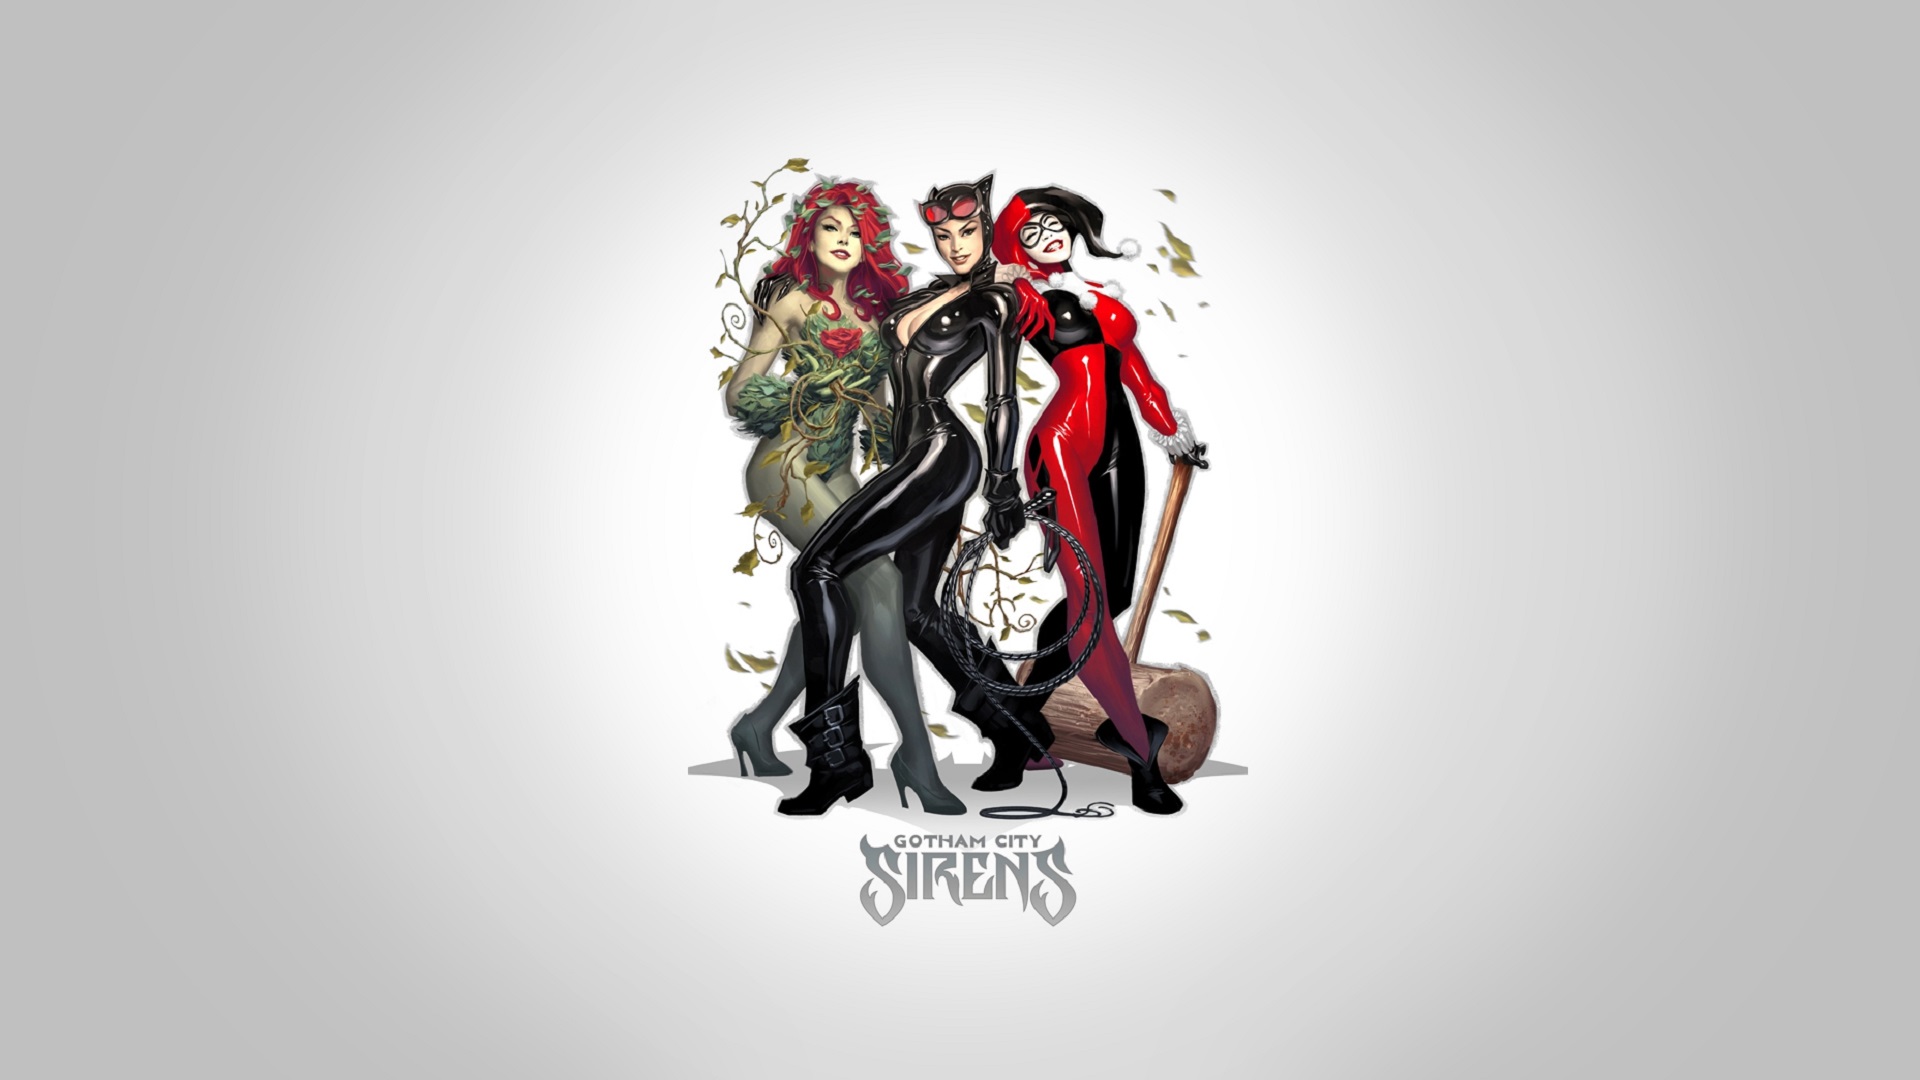 Poison Ivy Catwoman Harley Quinn 1920x1080